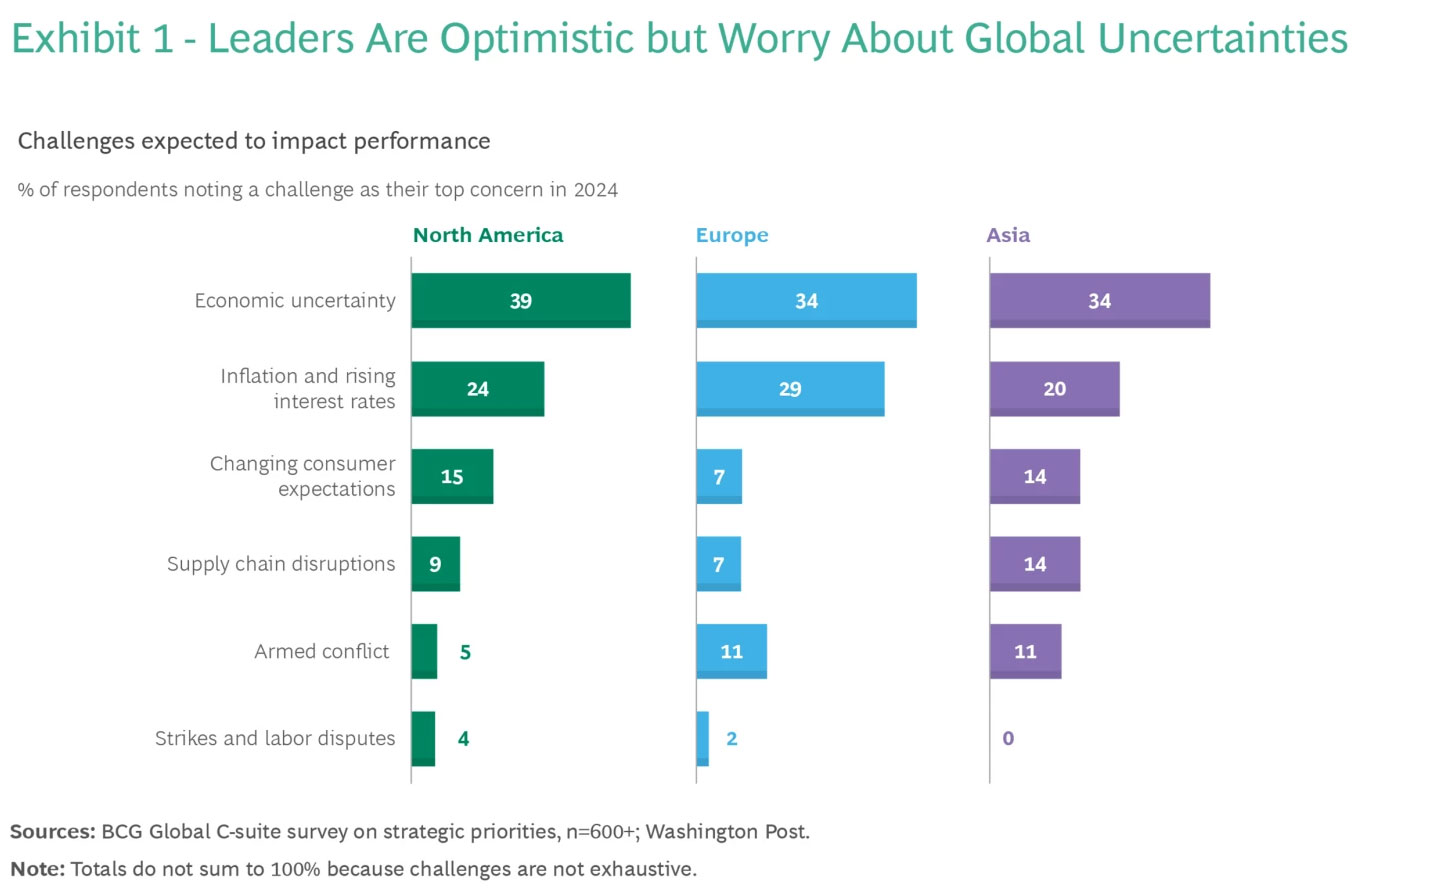 Leaders are optimistic but worry about global uncertainties